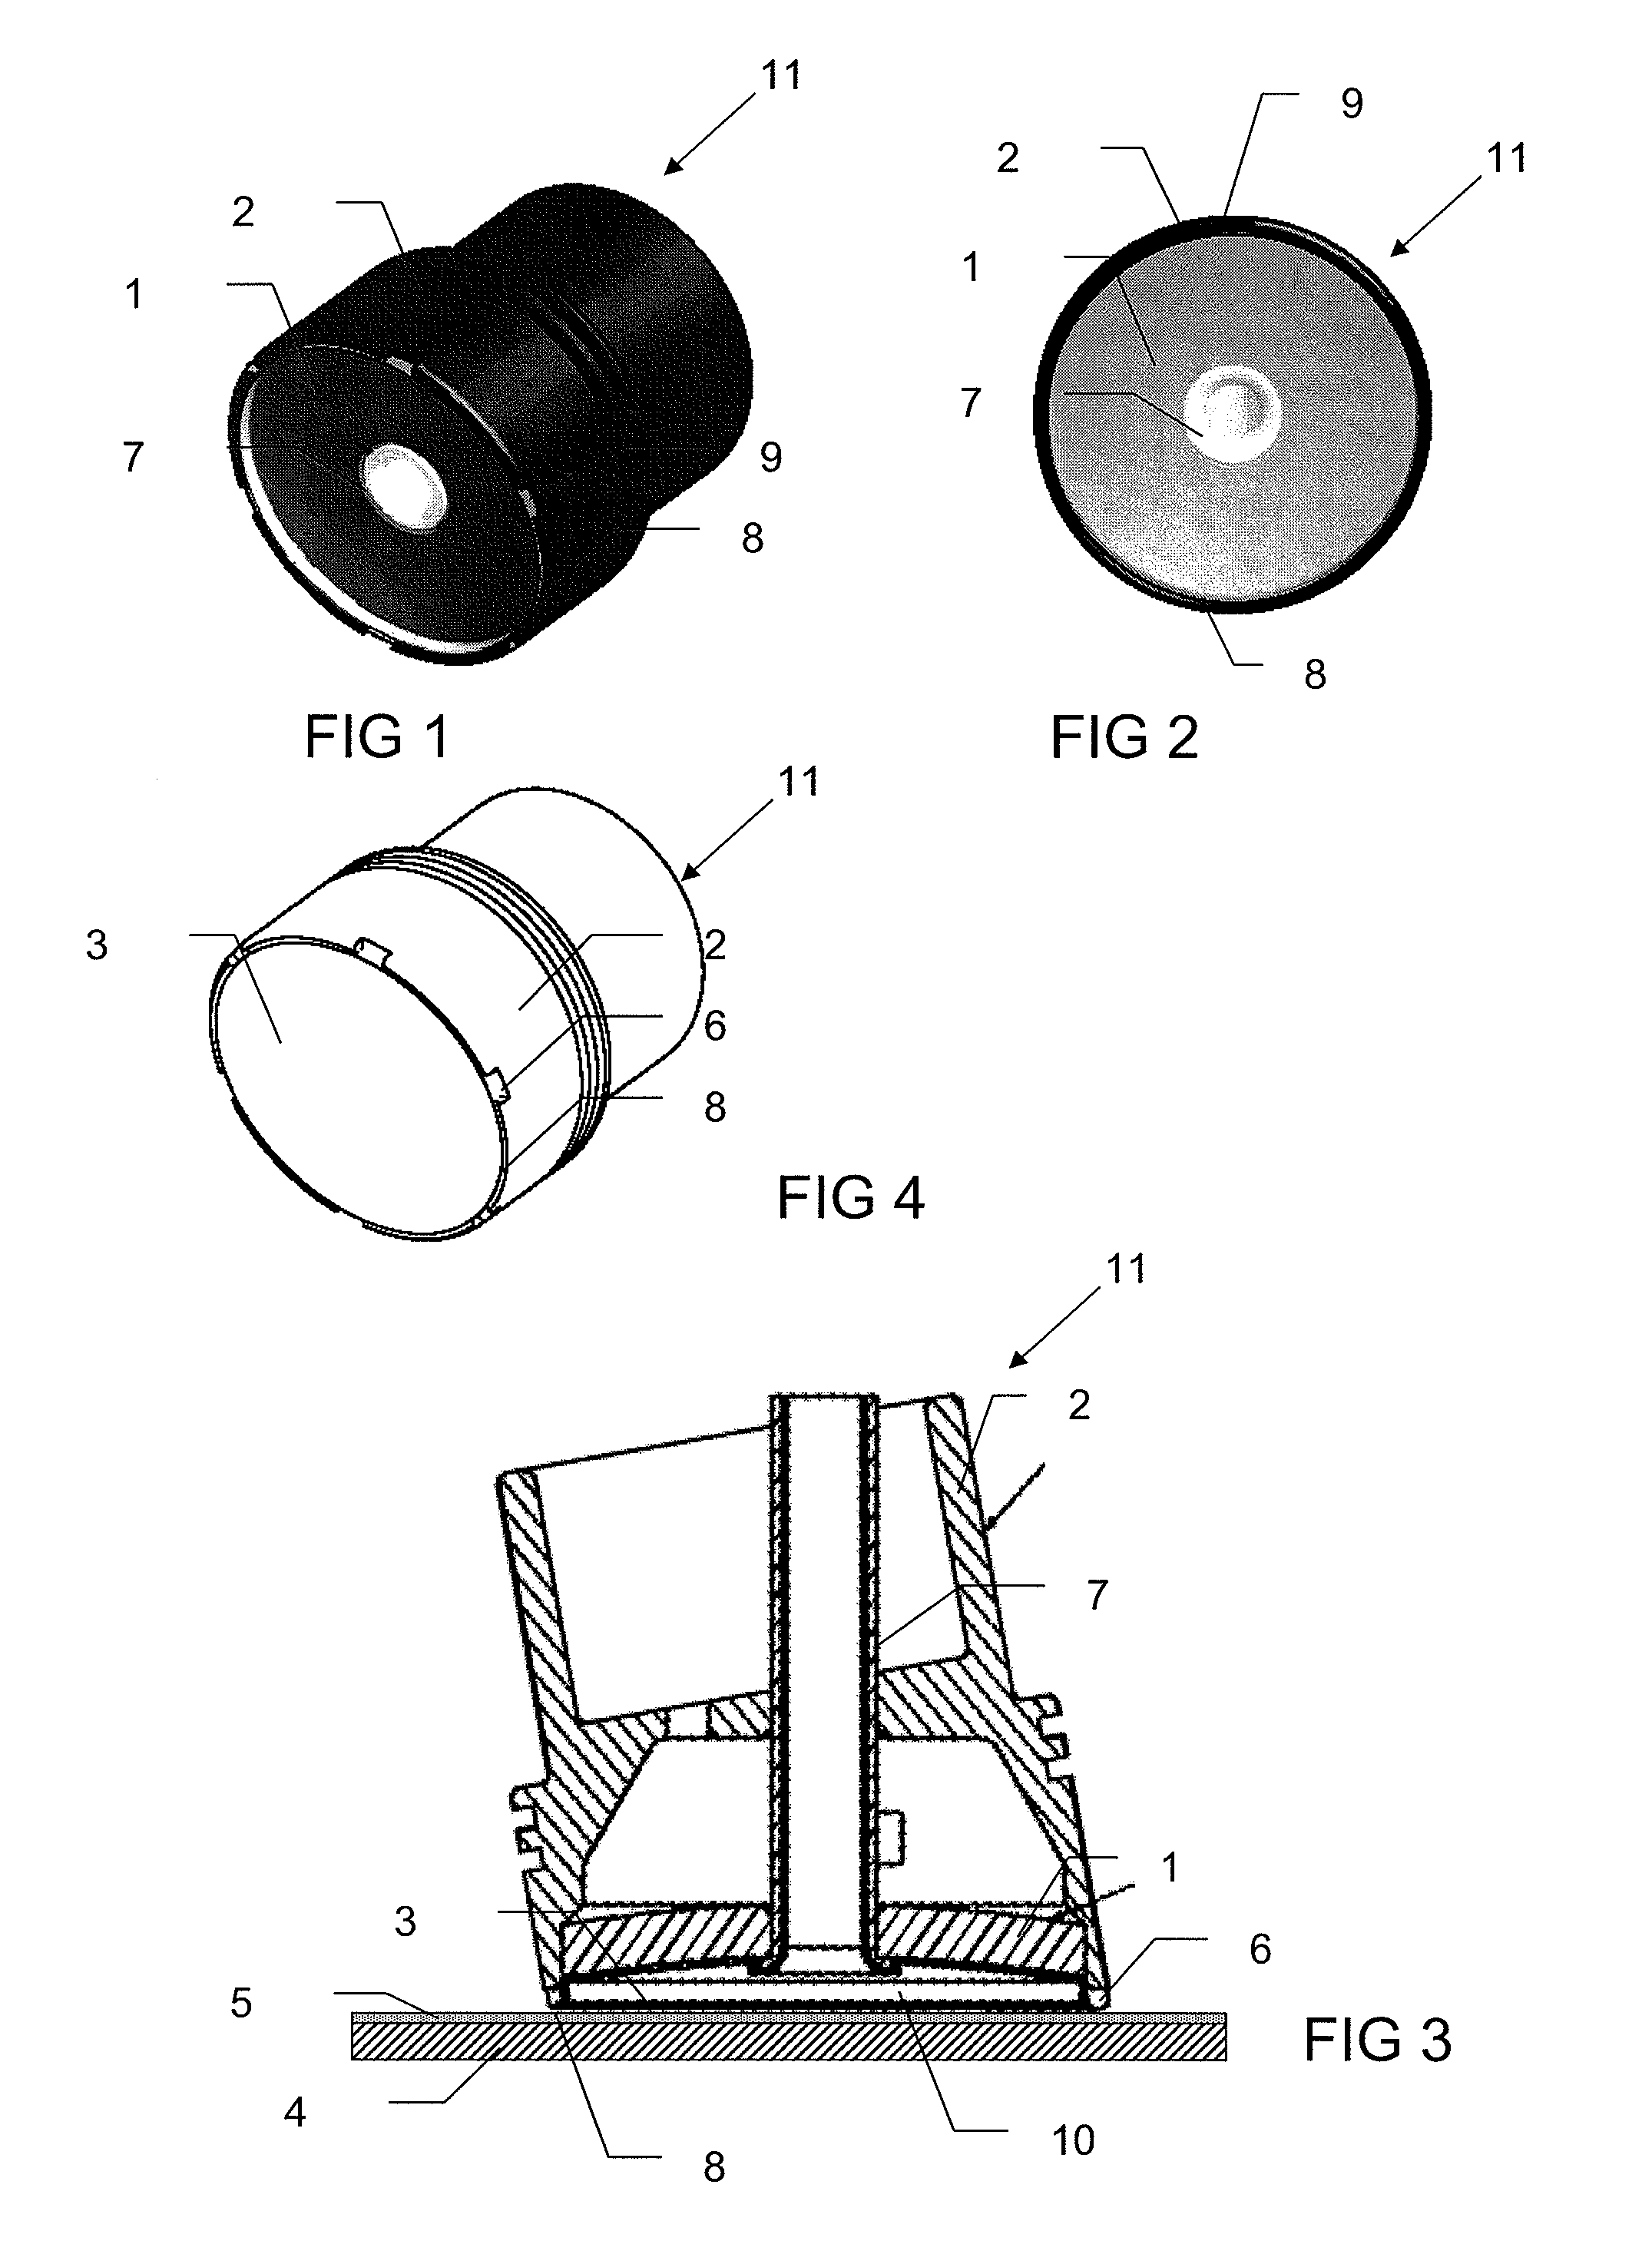 Method for manufacturing a membrane and object provided with such a membrane